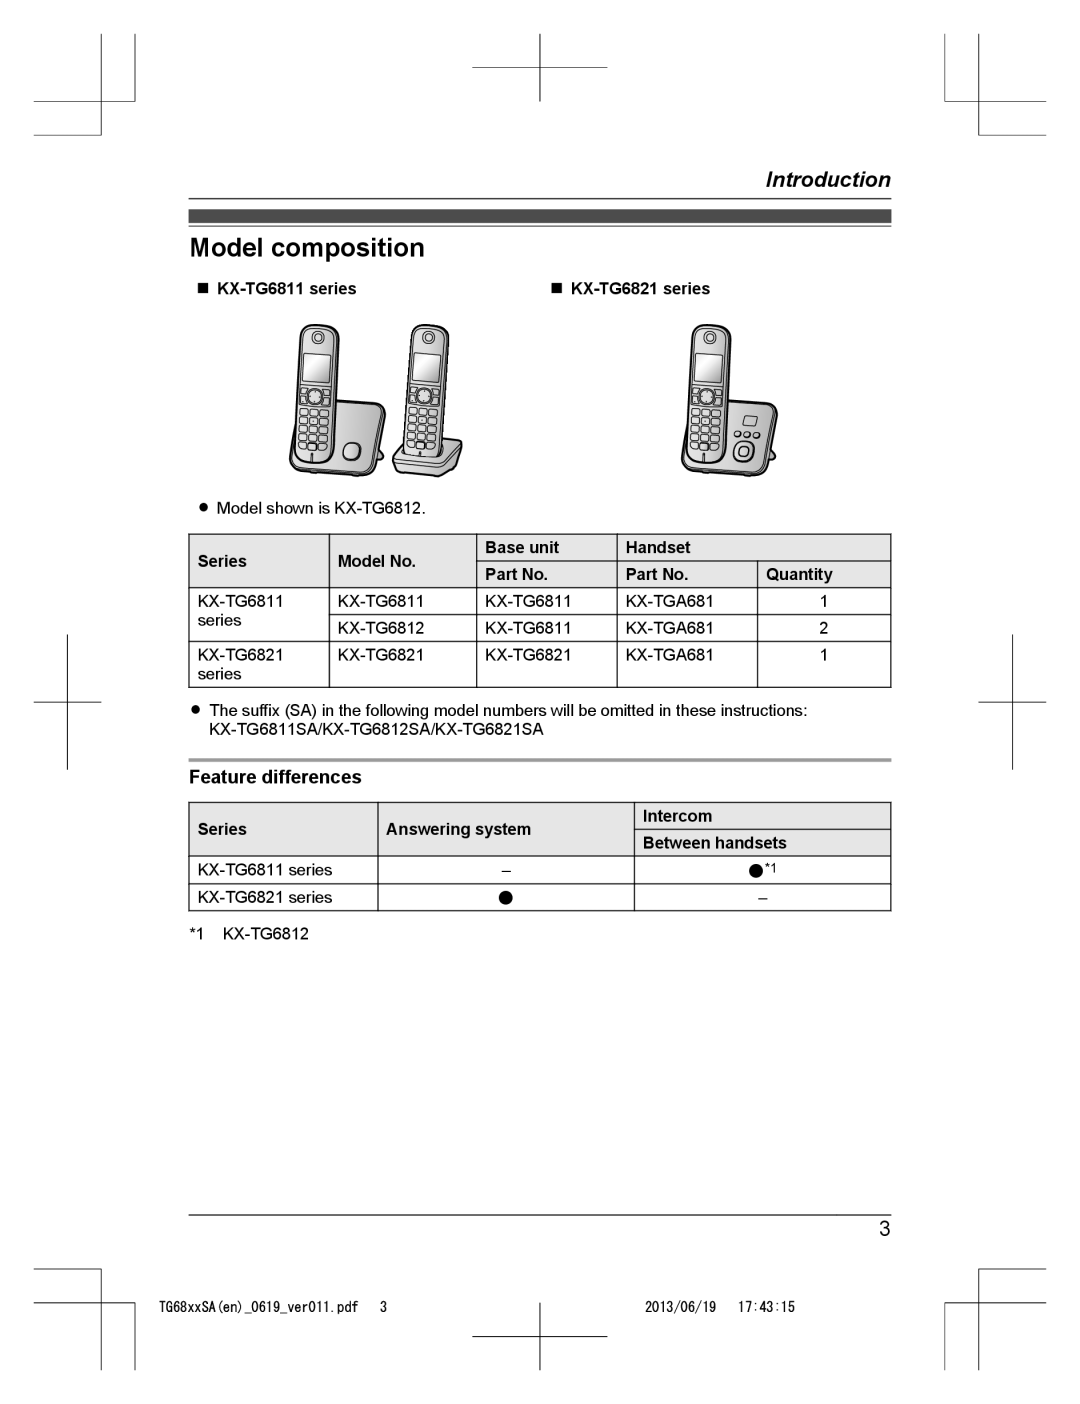 Panasonic KX-TG6812SA Model composition, Introduction, Feature differences, n KX-TG6811 series, Series, Model No, Handset 